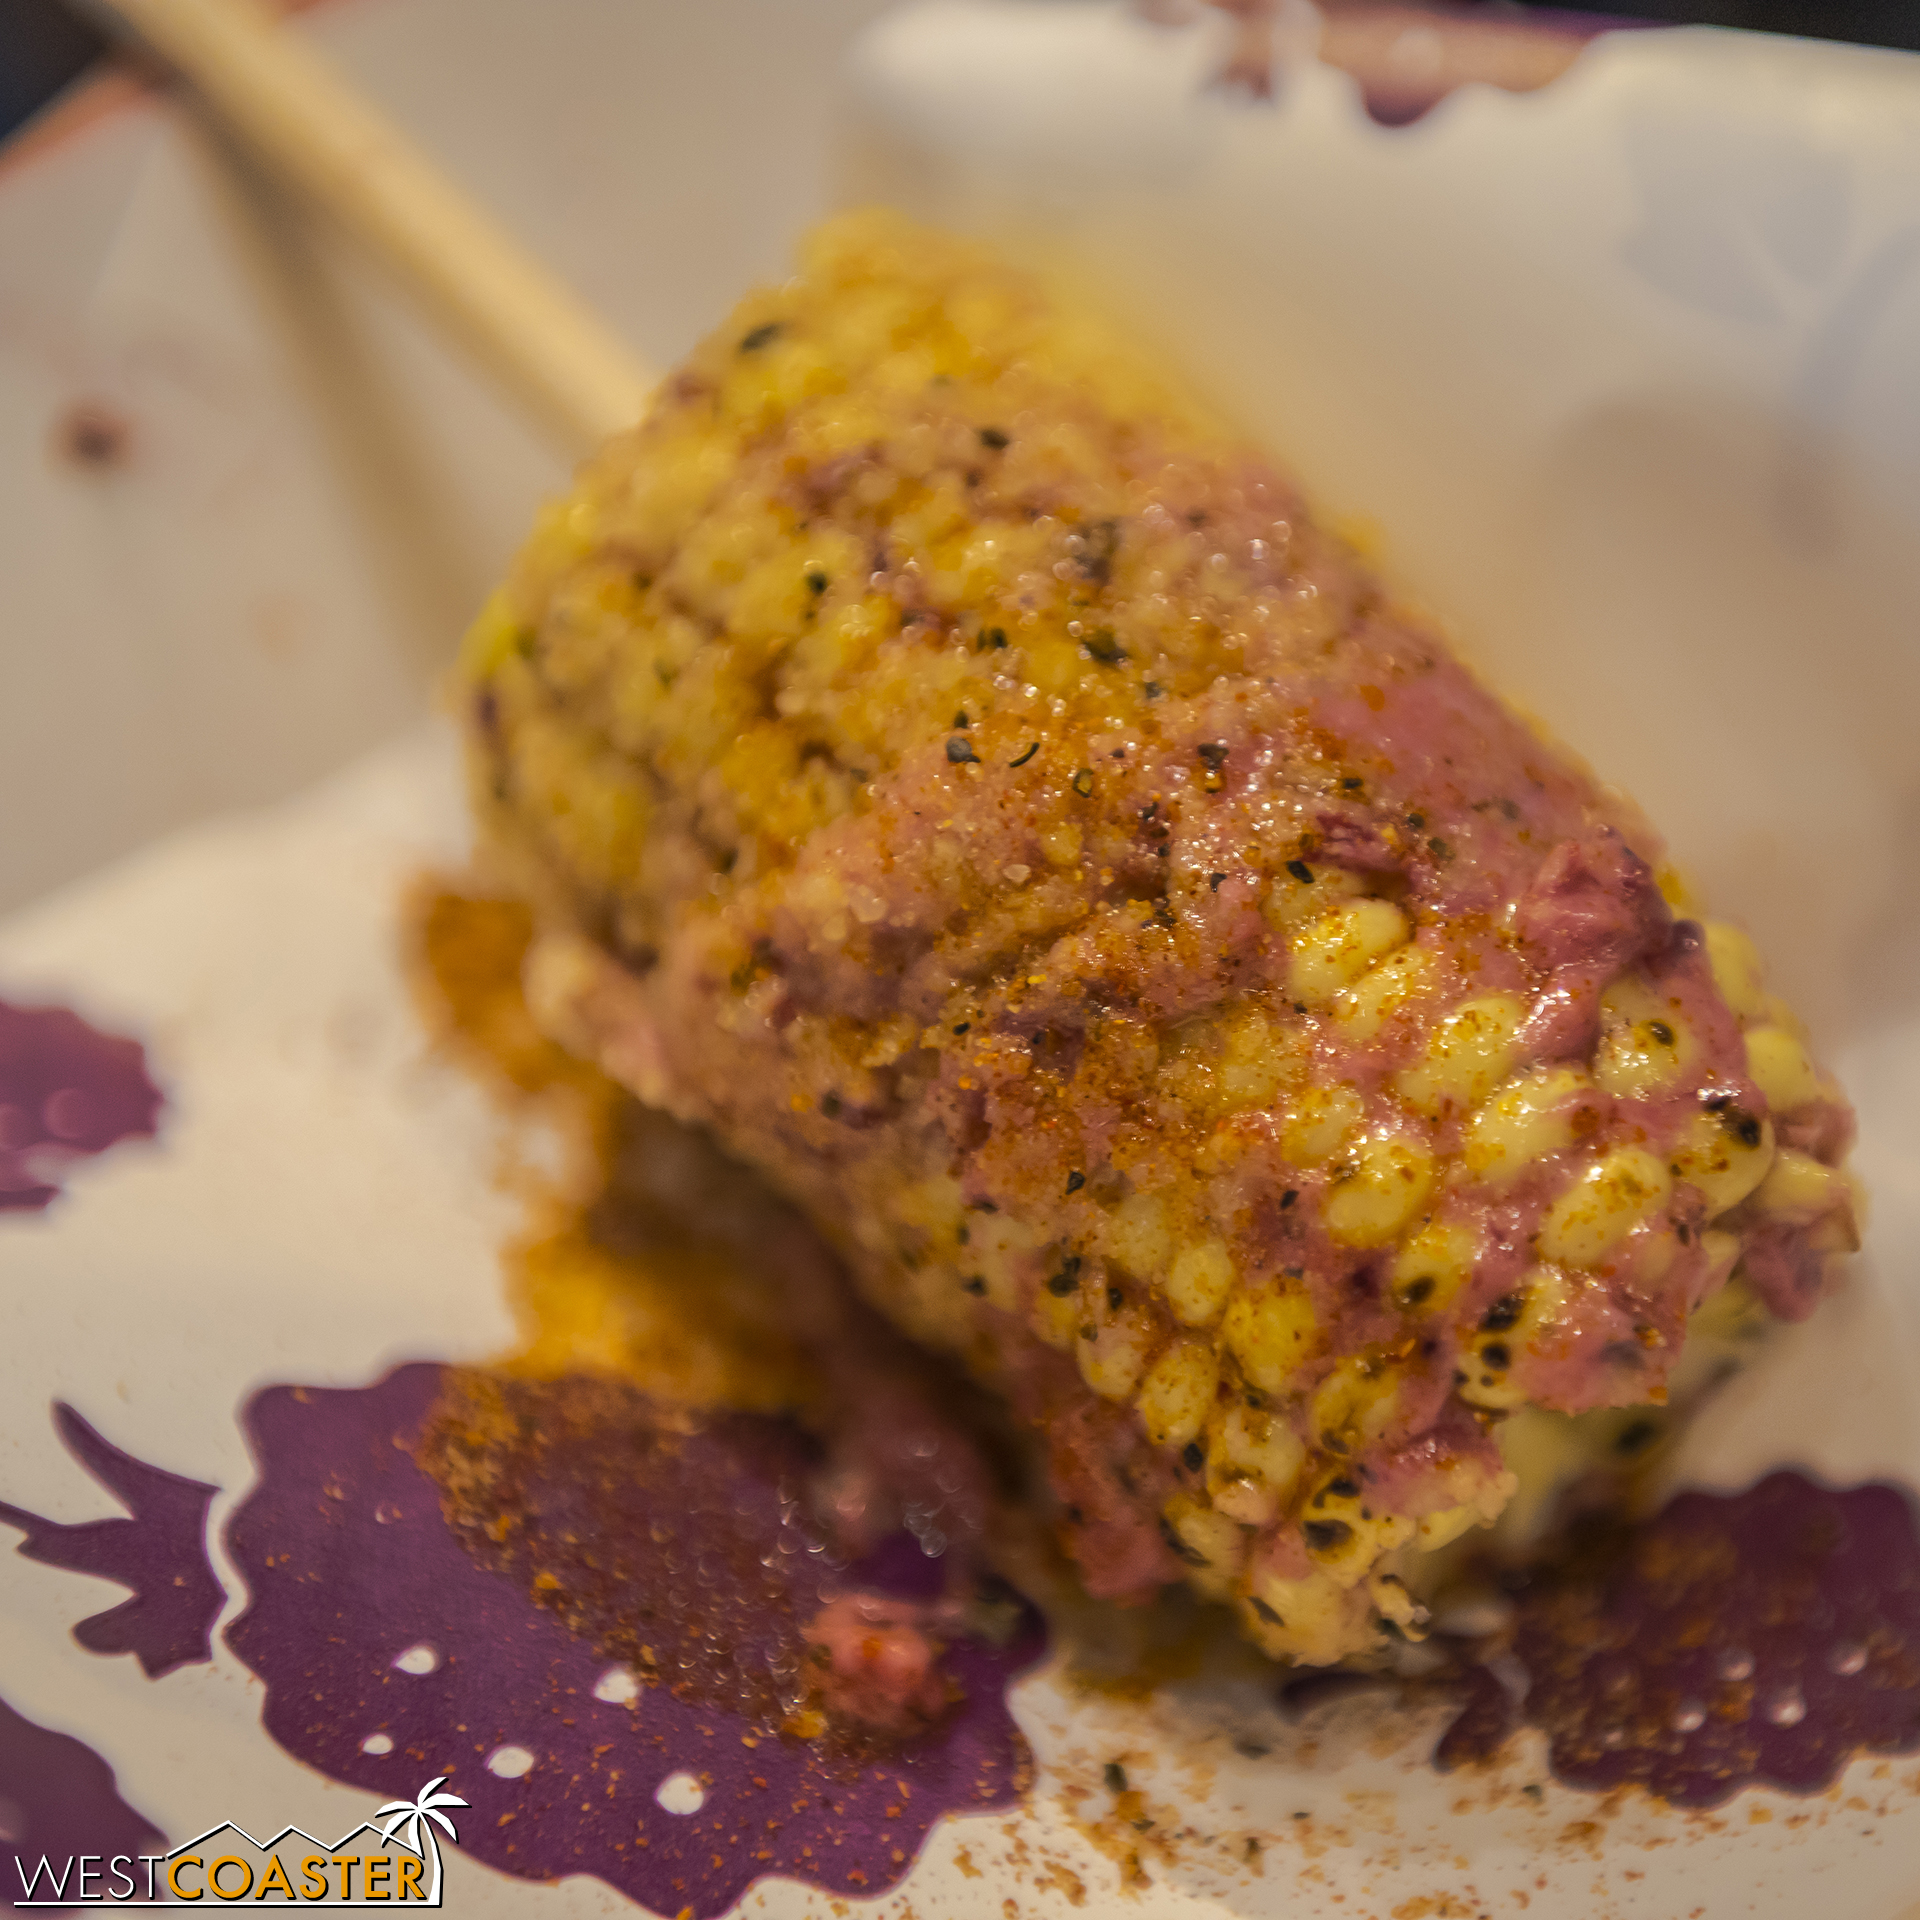  The Boysenberry Elote was quite satisfying.&nbsp; Those who enjoy elote will probably enjoy this as well. 